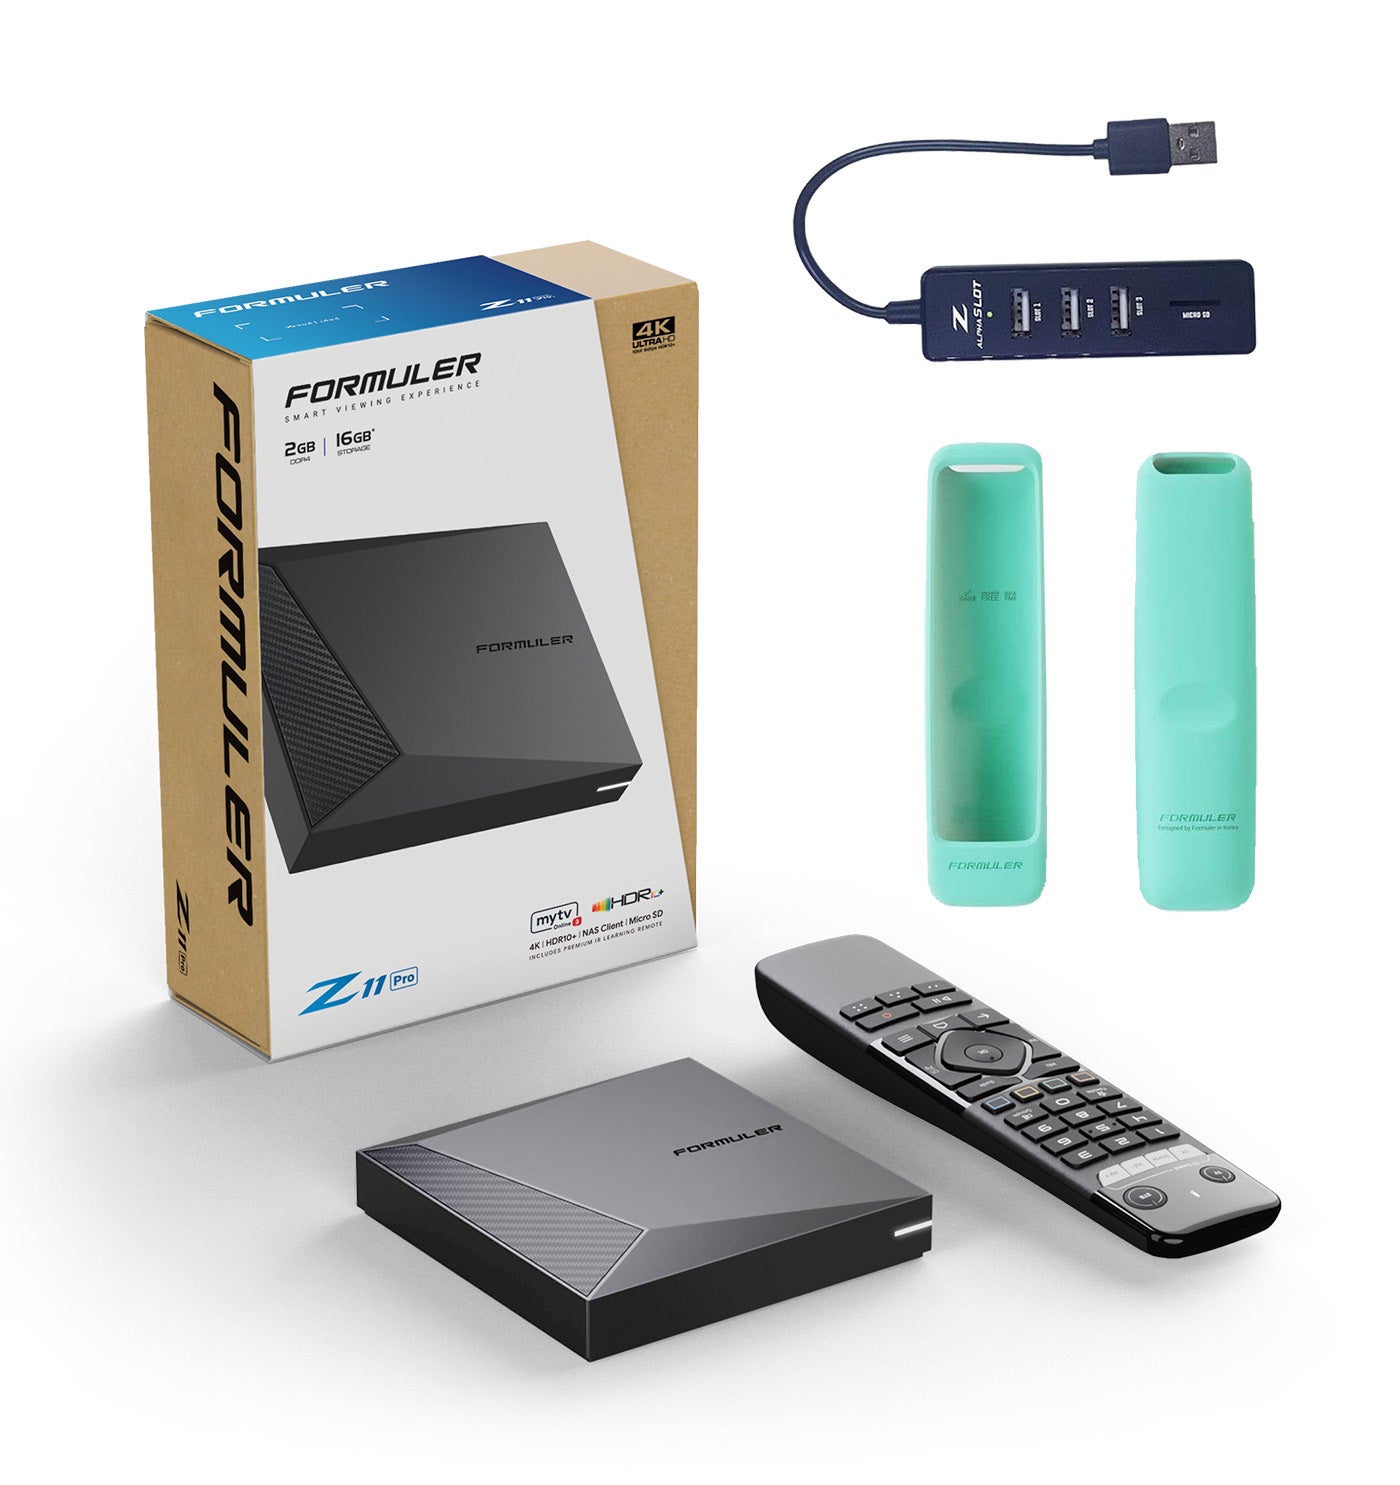 Formuler Z11 Pro + FREE ACCESSORY: 1x Turquoise Remote Cover + 1x USB Hub